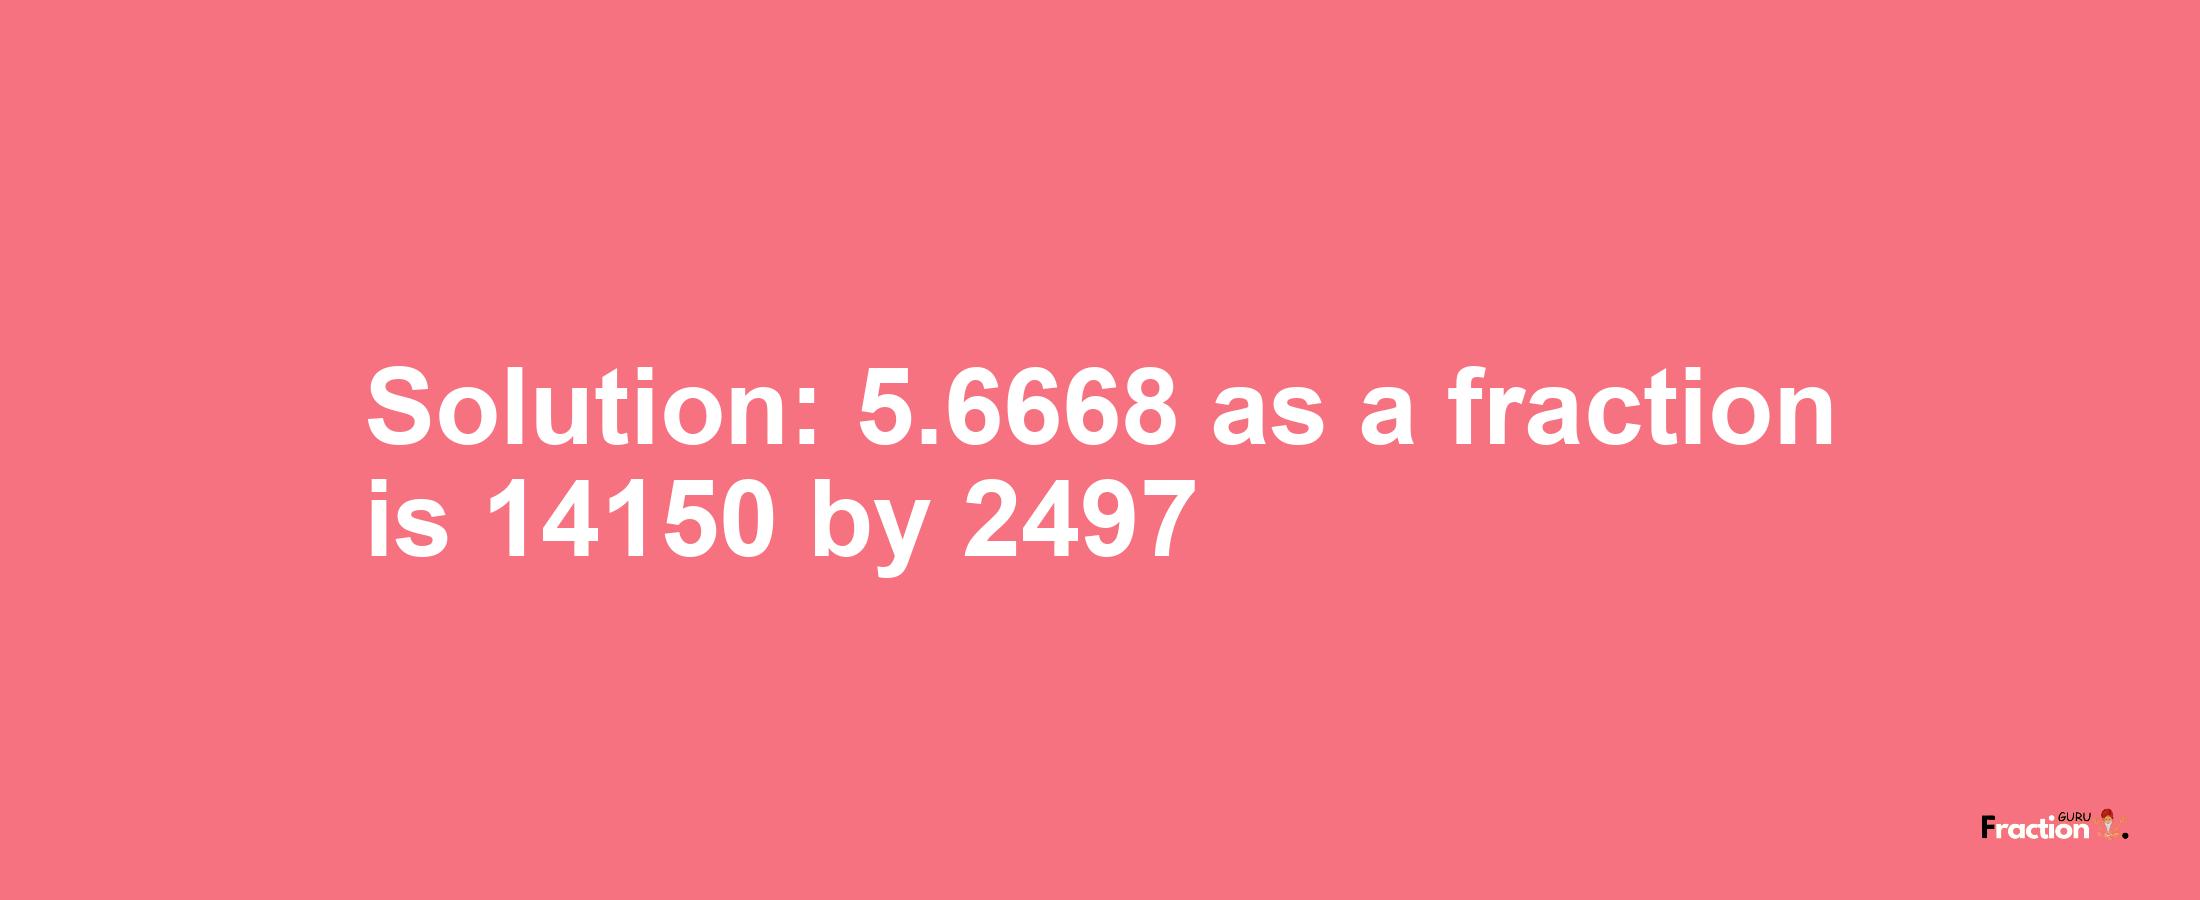 Solution:5.6668 as a fraction is 14150/2497